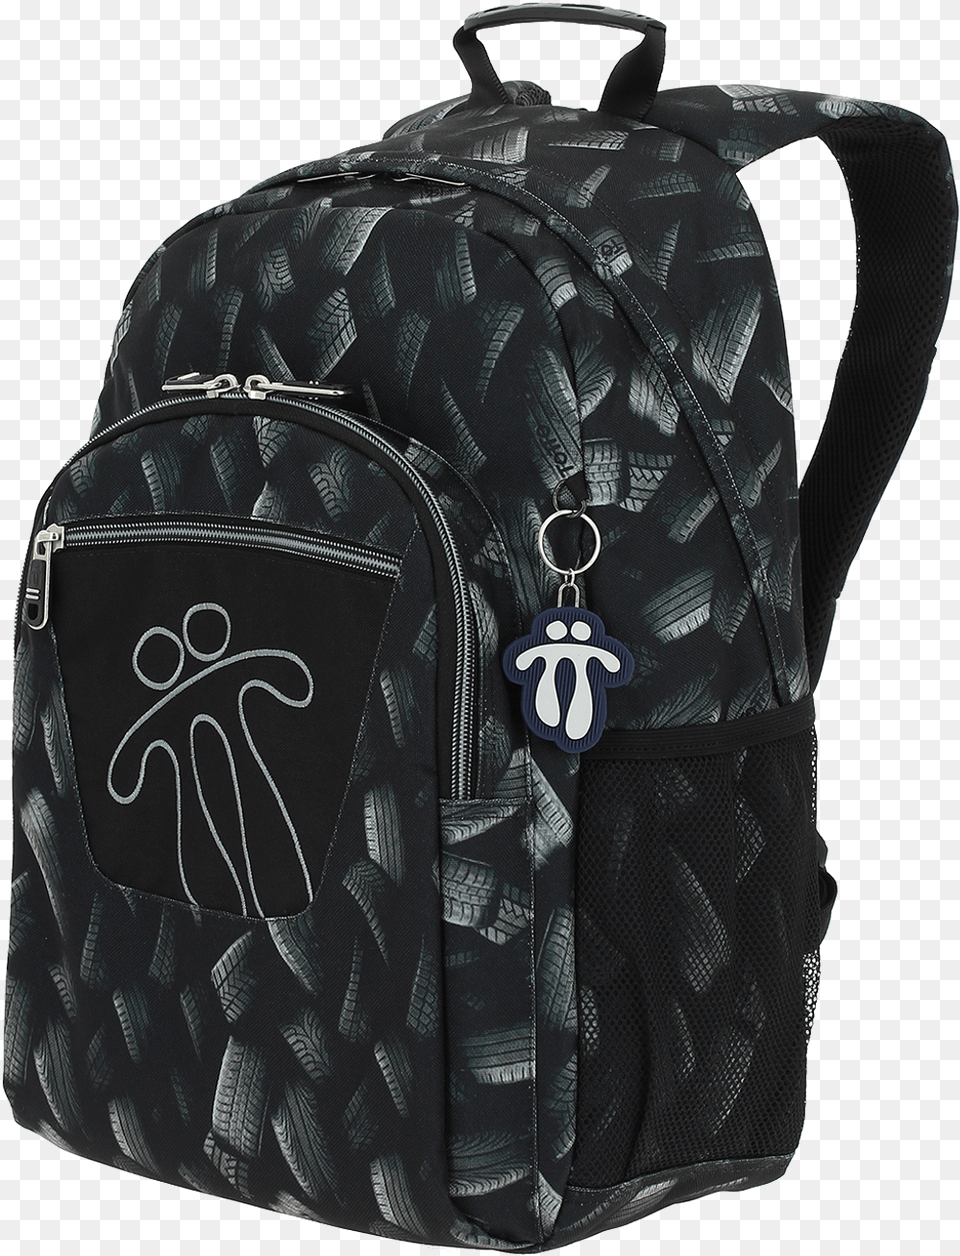 Cheap Leather School Backpack Totto, Bag, Accessories, Handbag Png